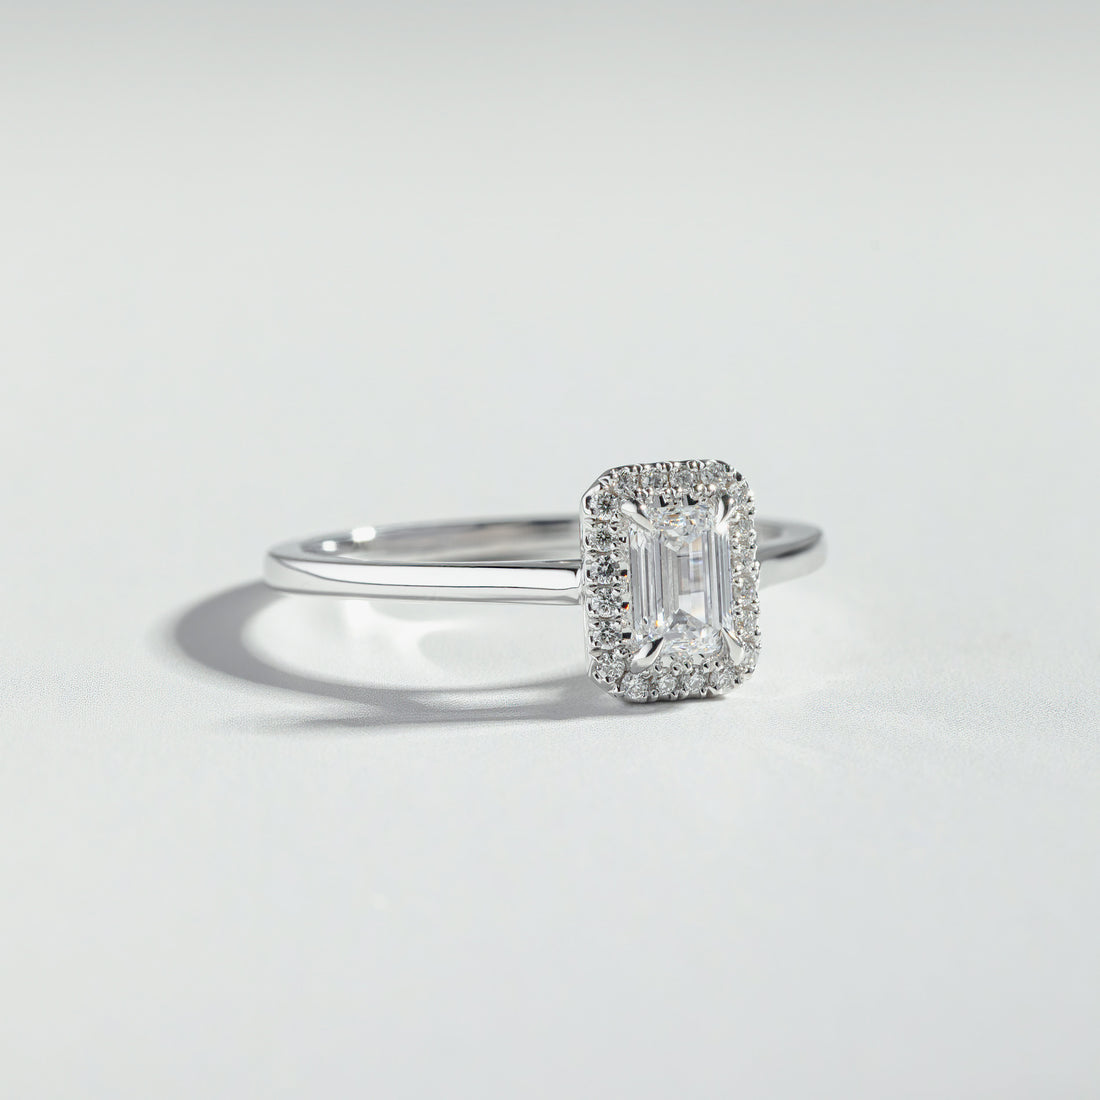 The Emerald Cut Halo Diamond Ring | Atelier RMR Montreal | Engagement Ring